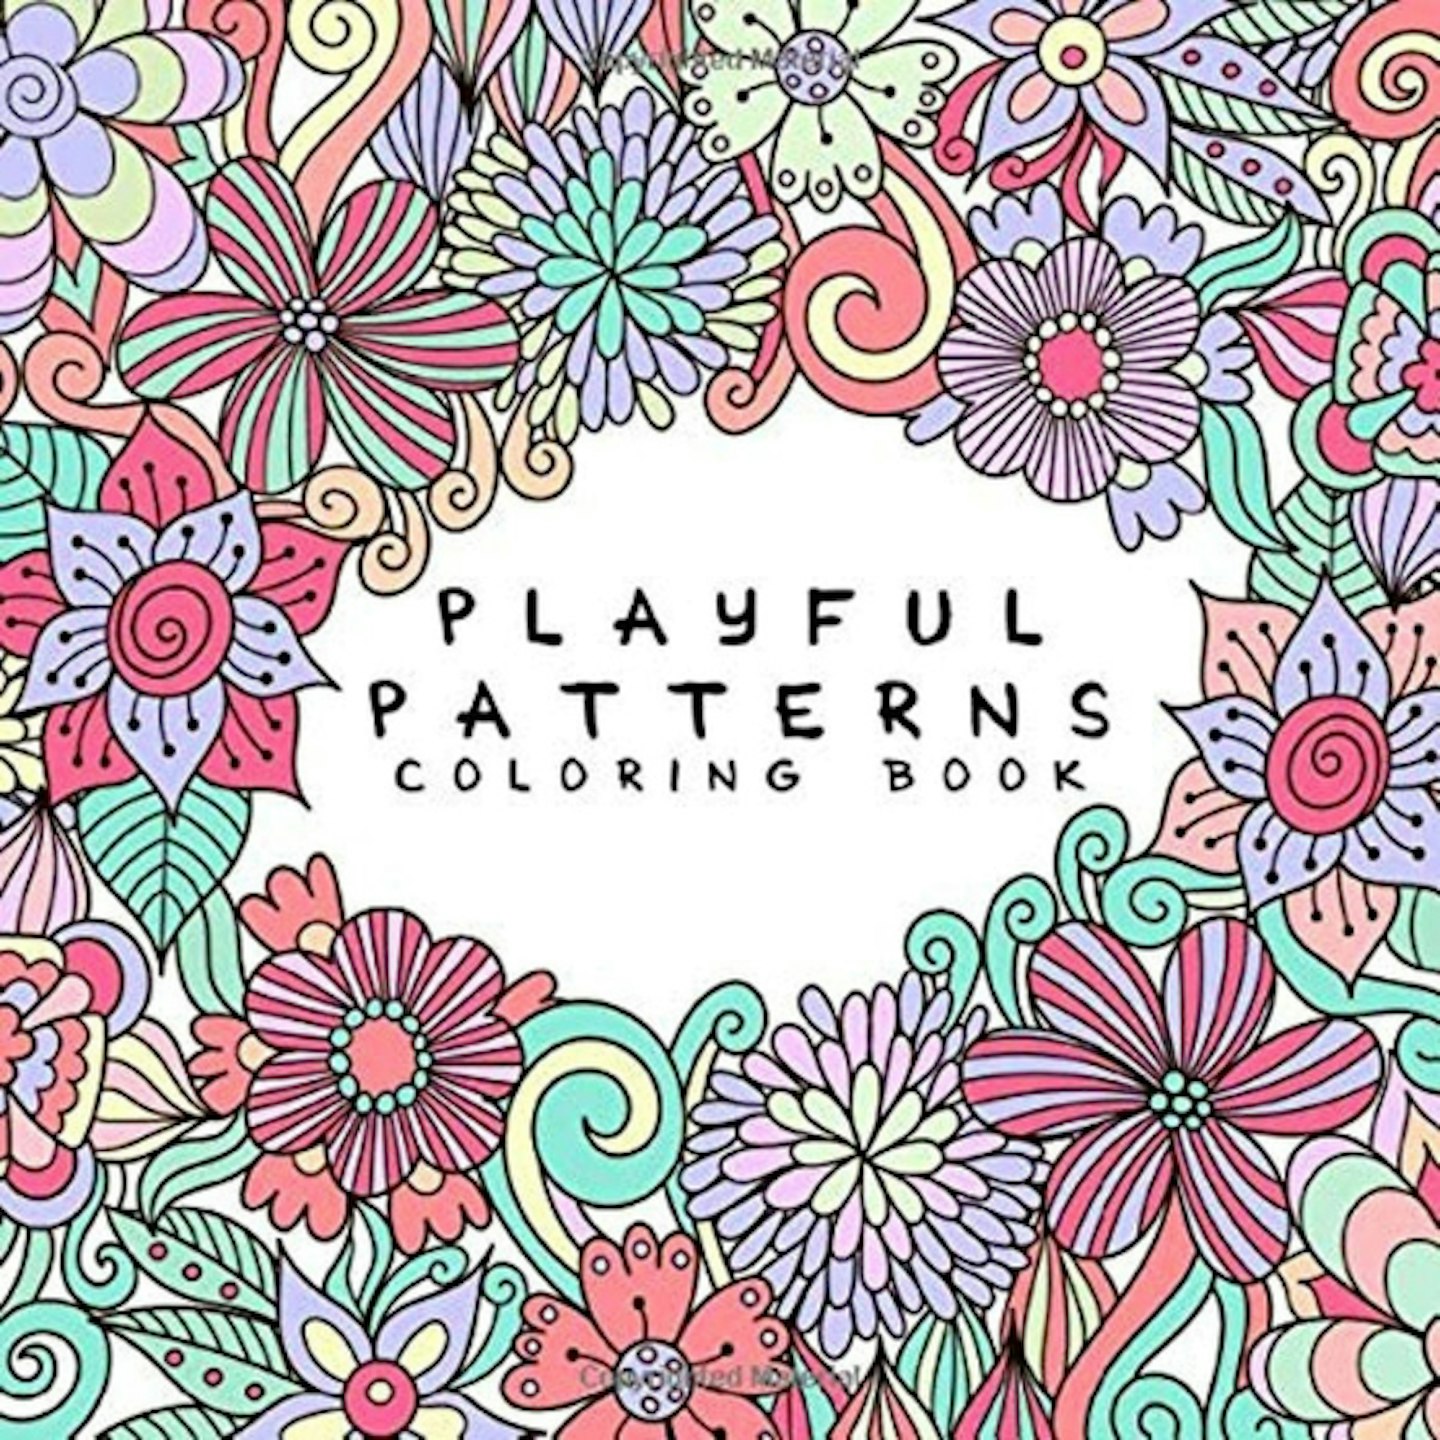 Playful patterns colouring book